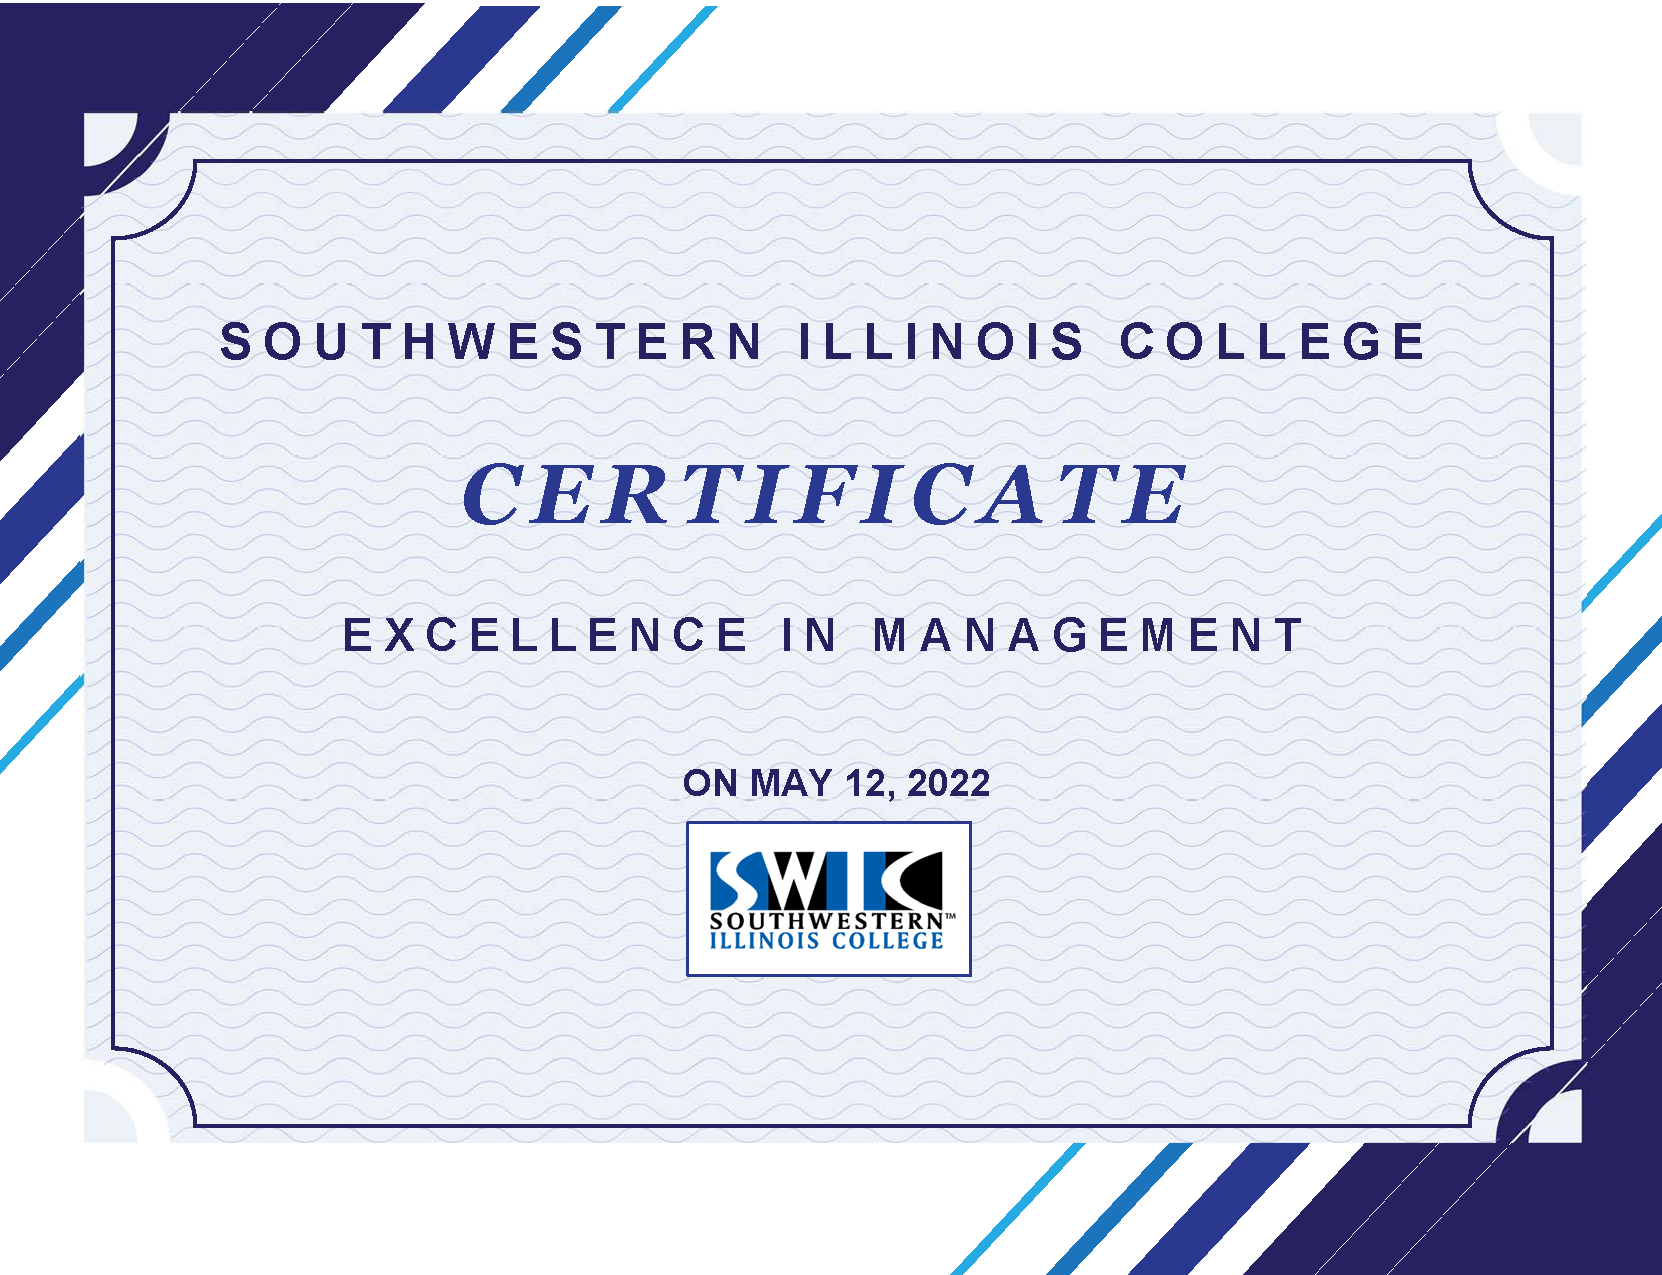 Southwestern Illinois College Certificate Excellence in Management